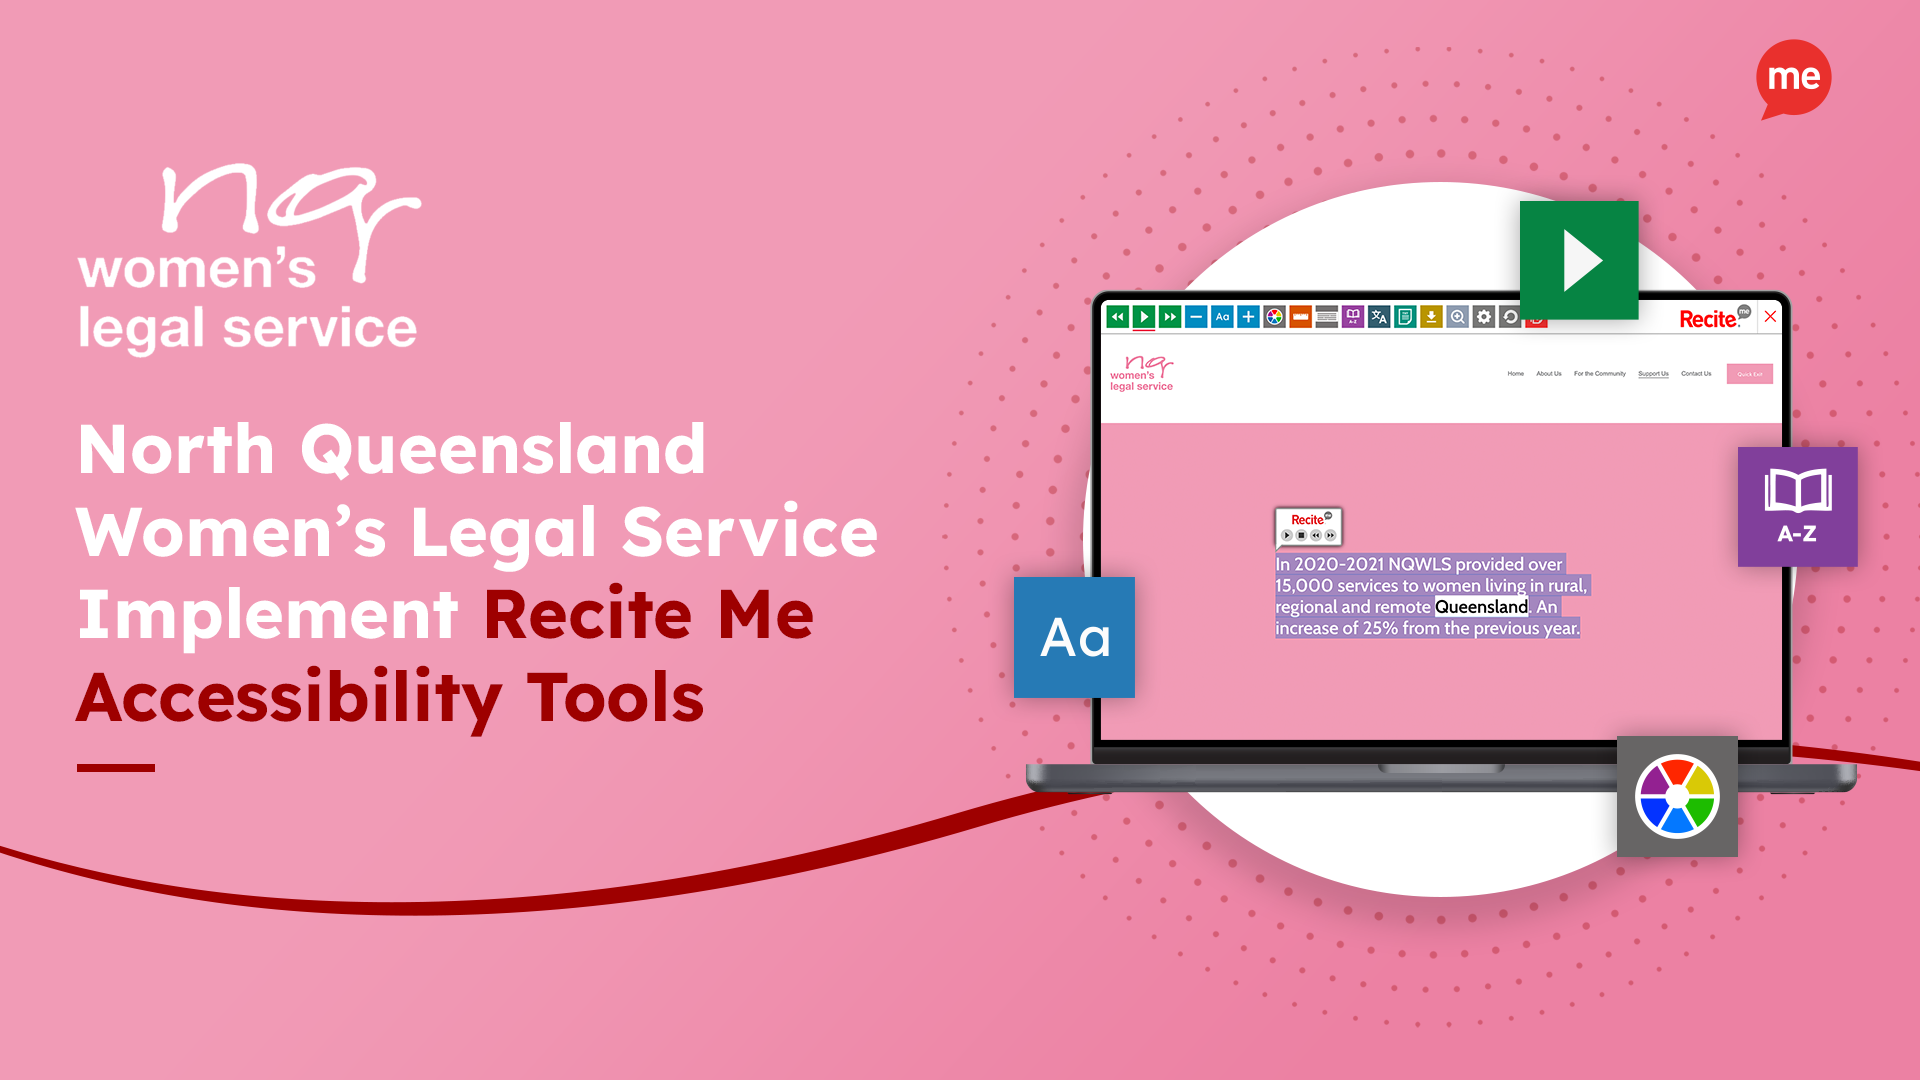 North Queensland Women’s Legal Service Implement Recite Me Accessibility Tools